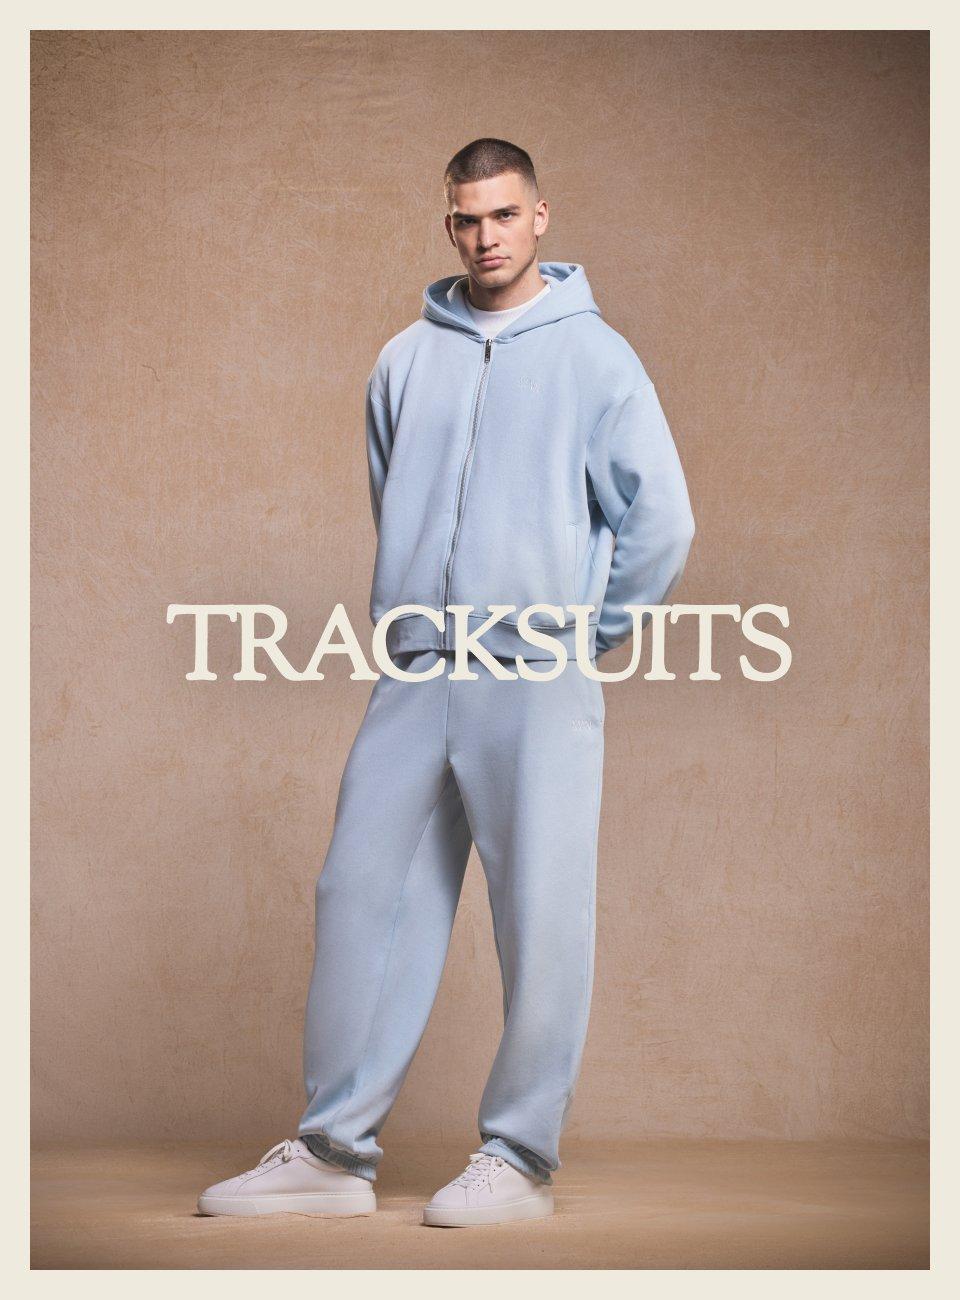 TRACKSUITS FROM $40